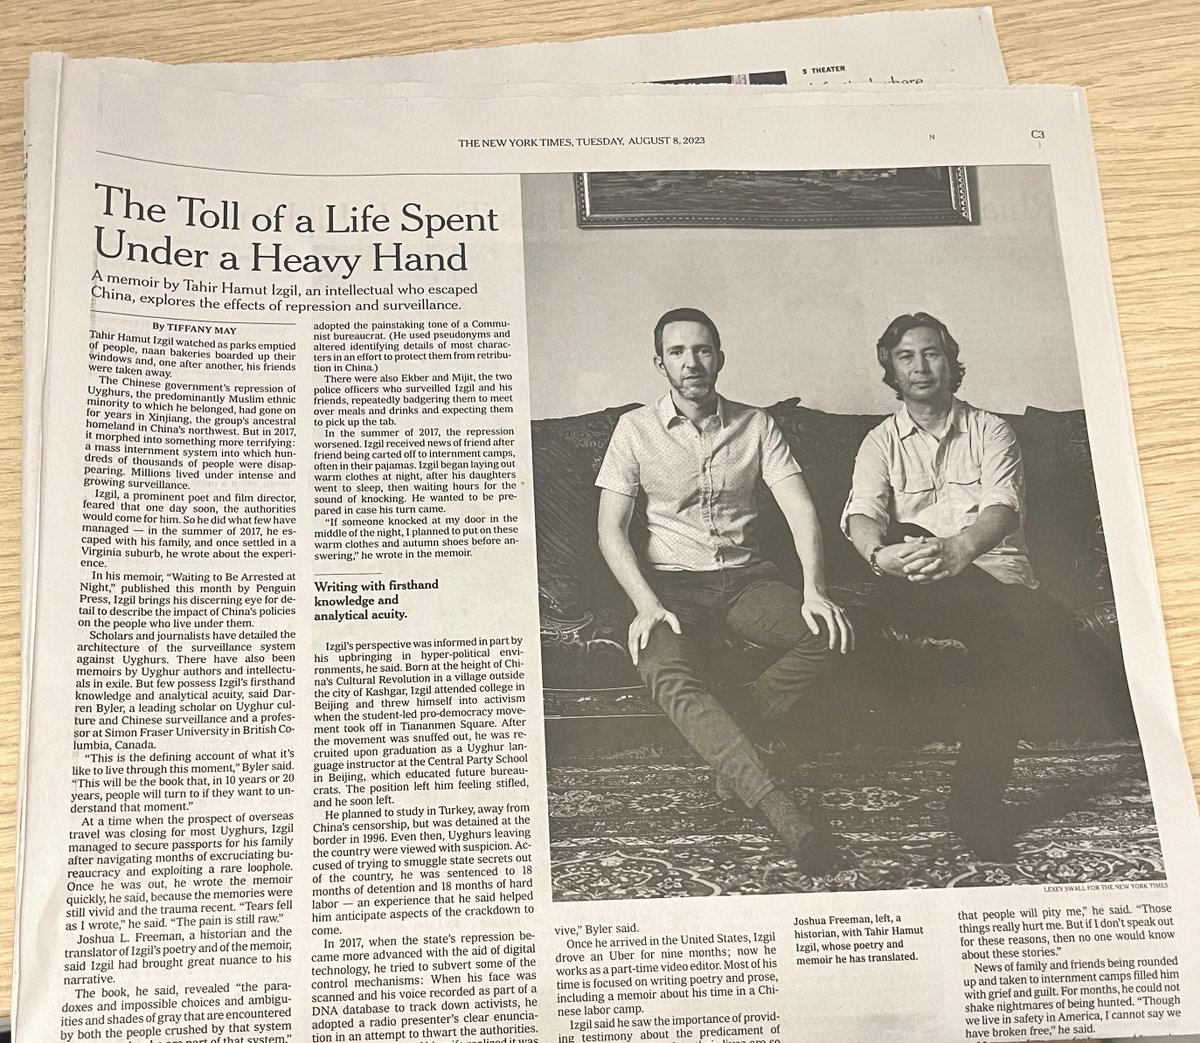 From today's @nytimes. Thanks again to @nytmay for this outstanding profile of leading #Uyghur poet Tahir Hamut Izgil. It's been a privilege translating @TahirIzgil's poetry & memoir, and it's so good to see how his work is raising awareness of the crisis in the Uyghur homeland.